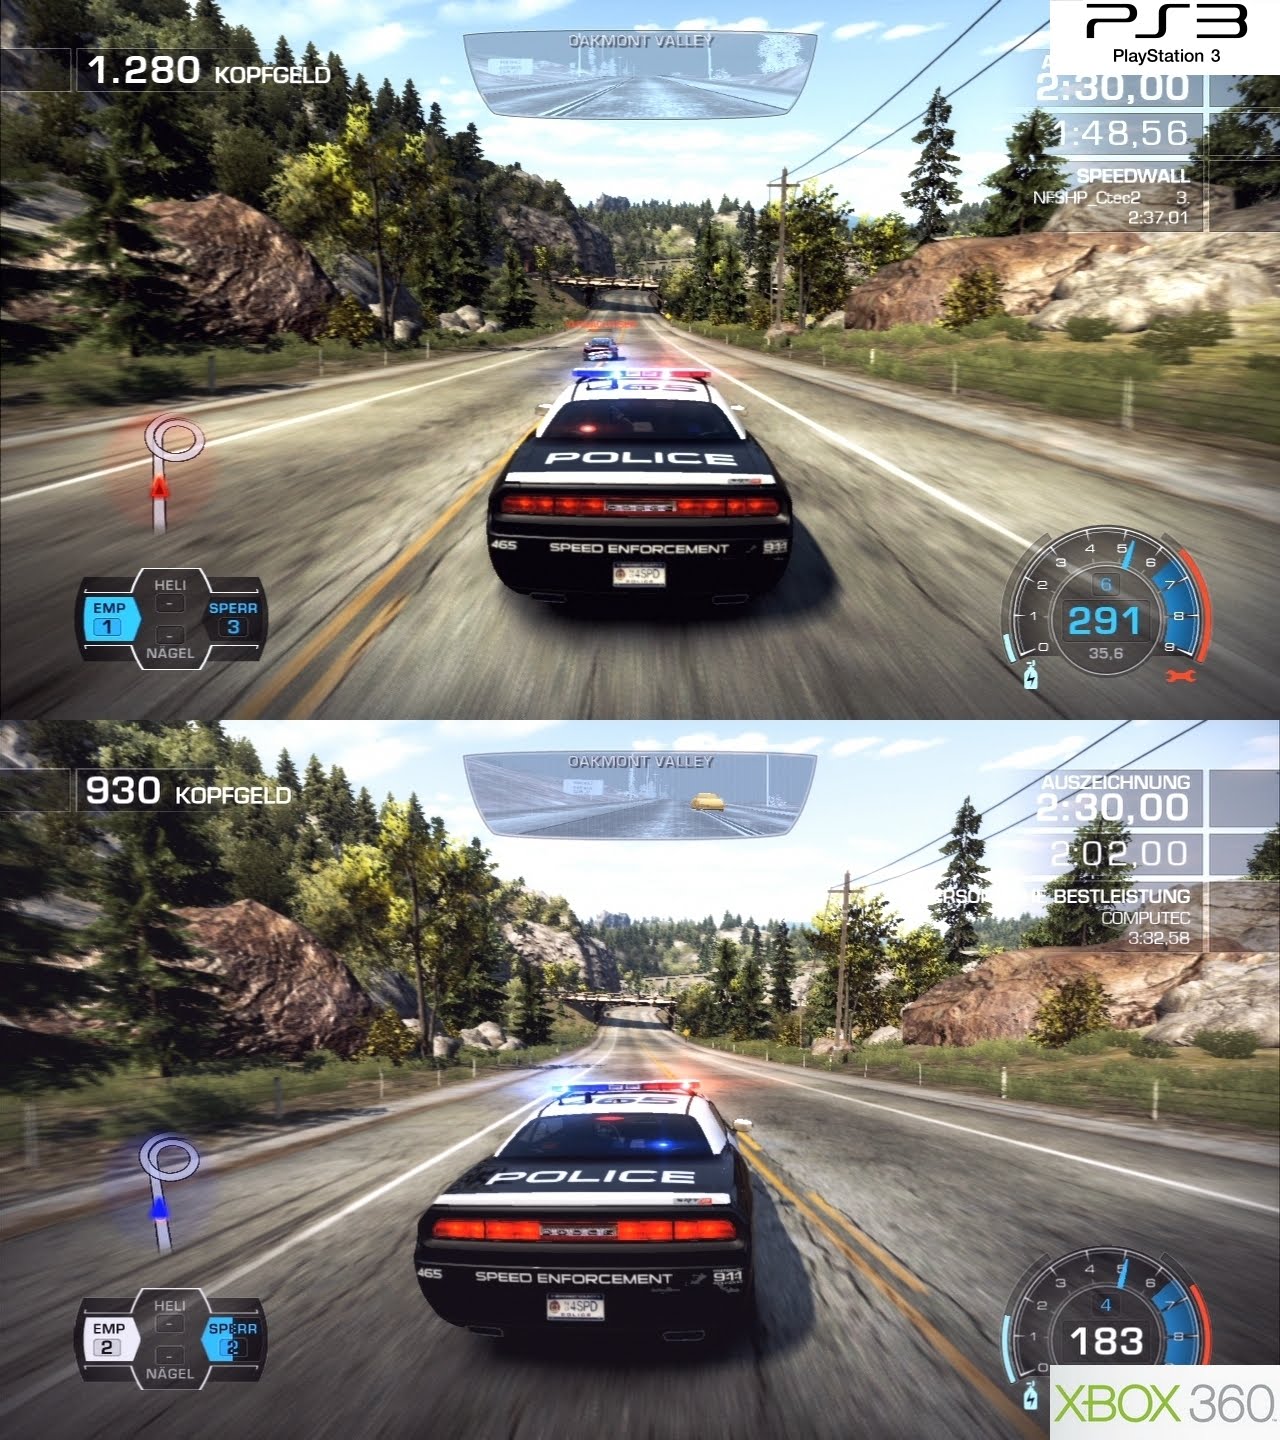 IQGamer: Analysis: Need For Speed: Pursuit (PS3 vs 360)